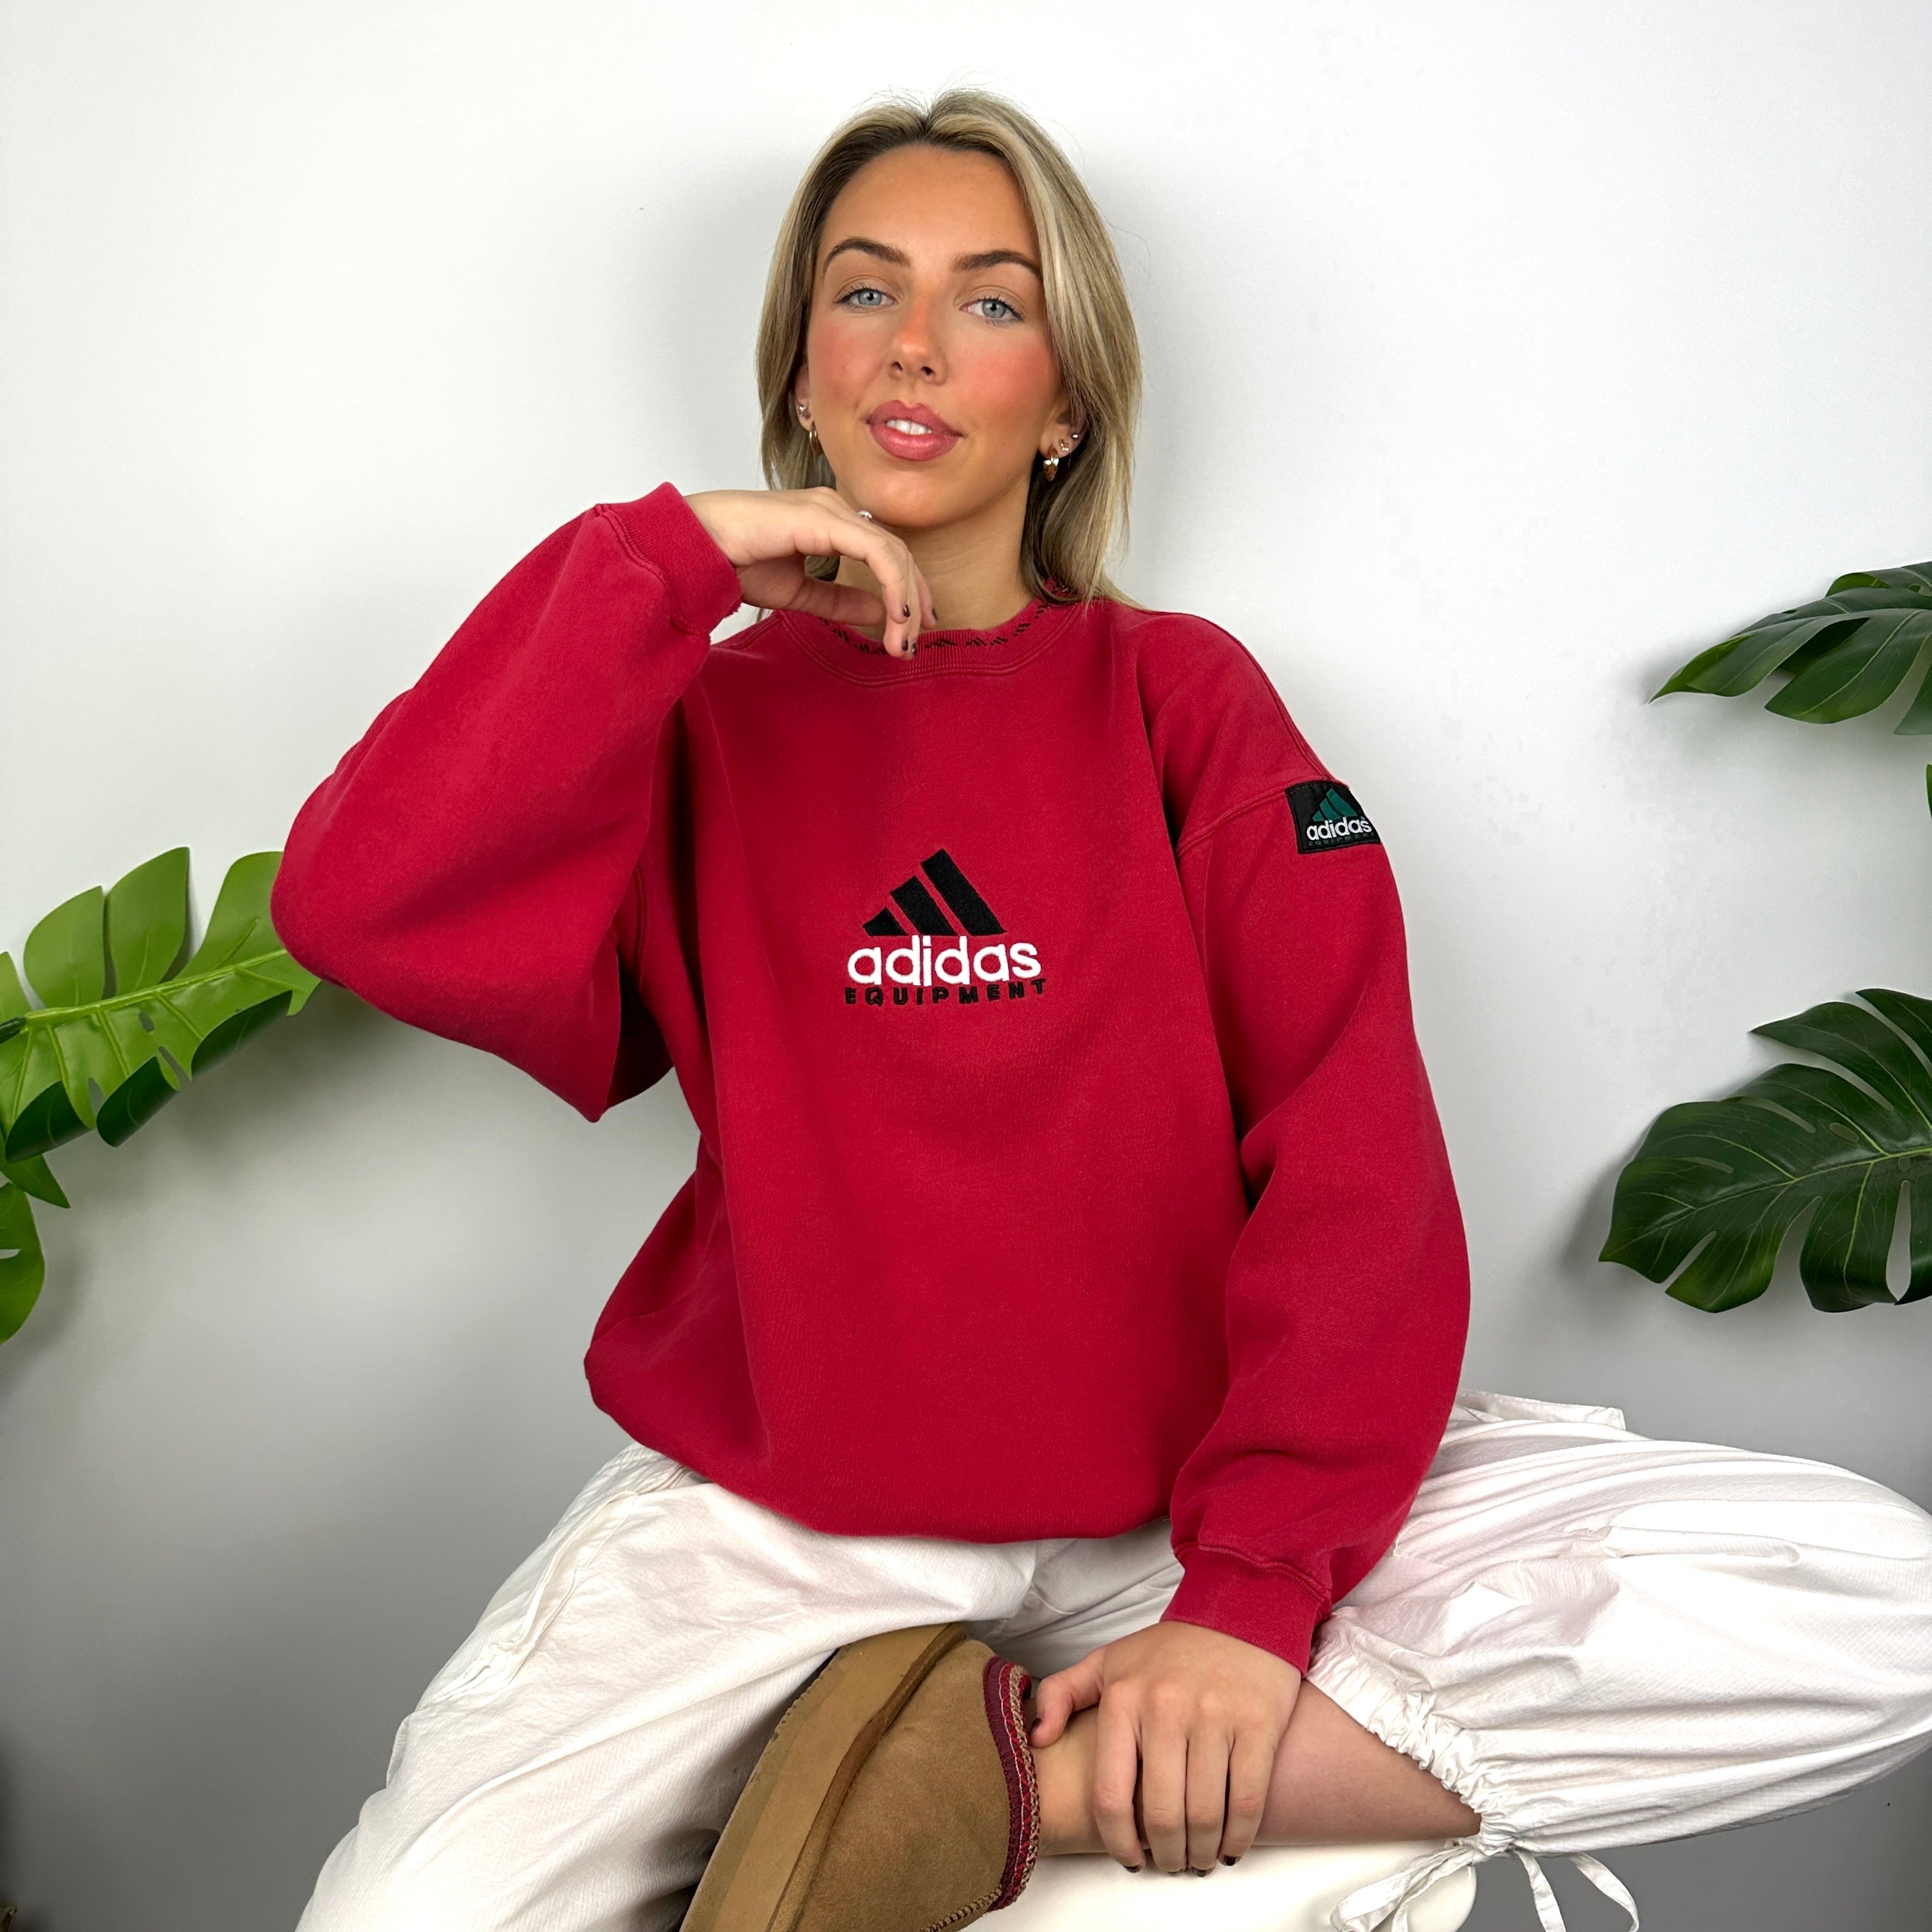 Adidas Equipment RARE Red Embroidered Spell Out Sweatshirt (M)